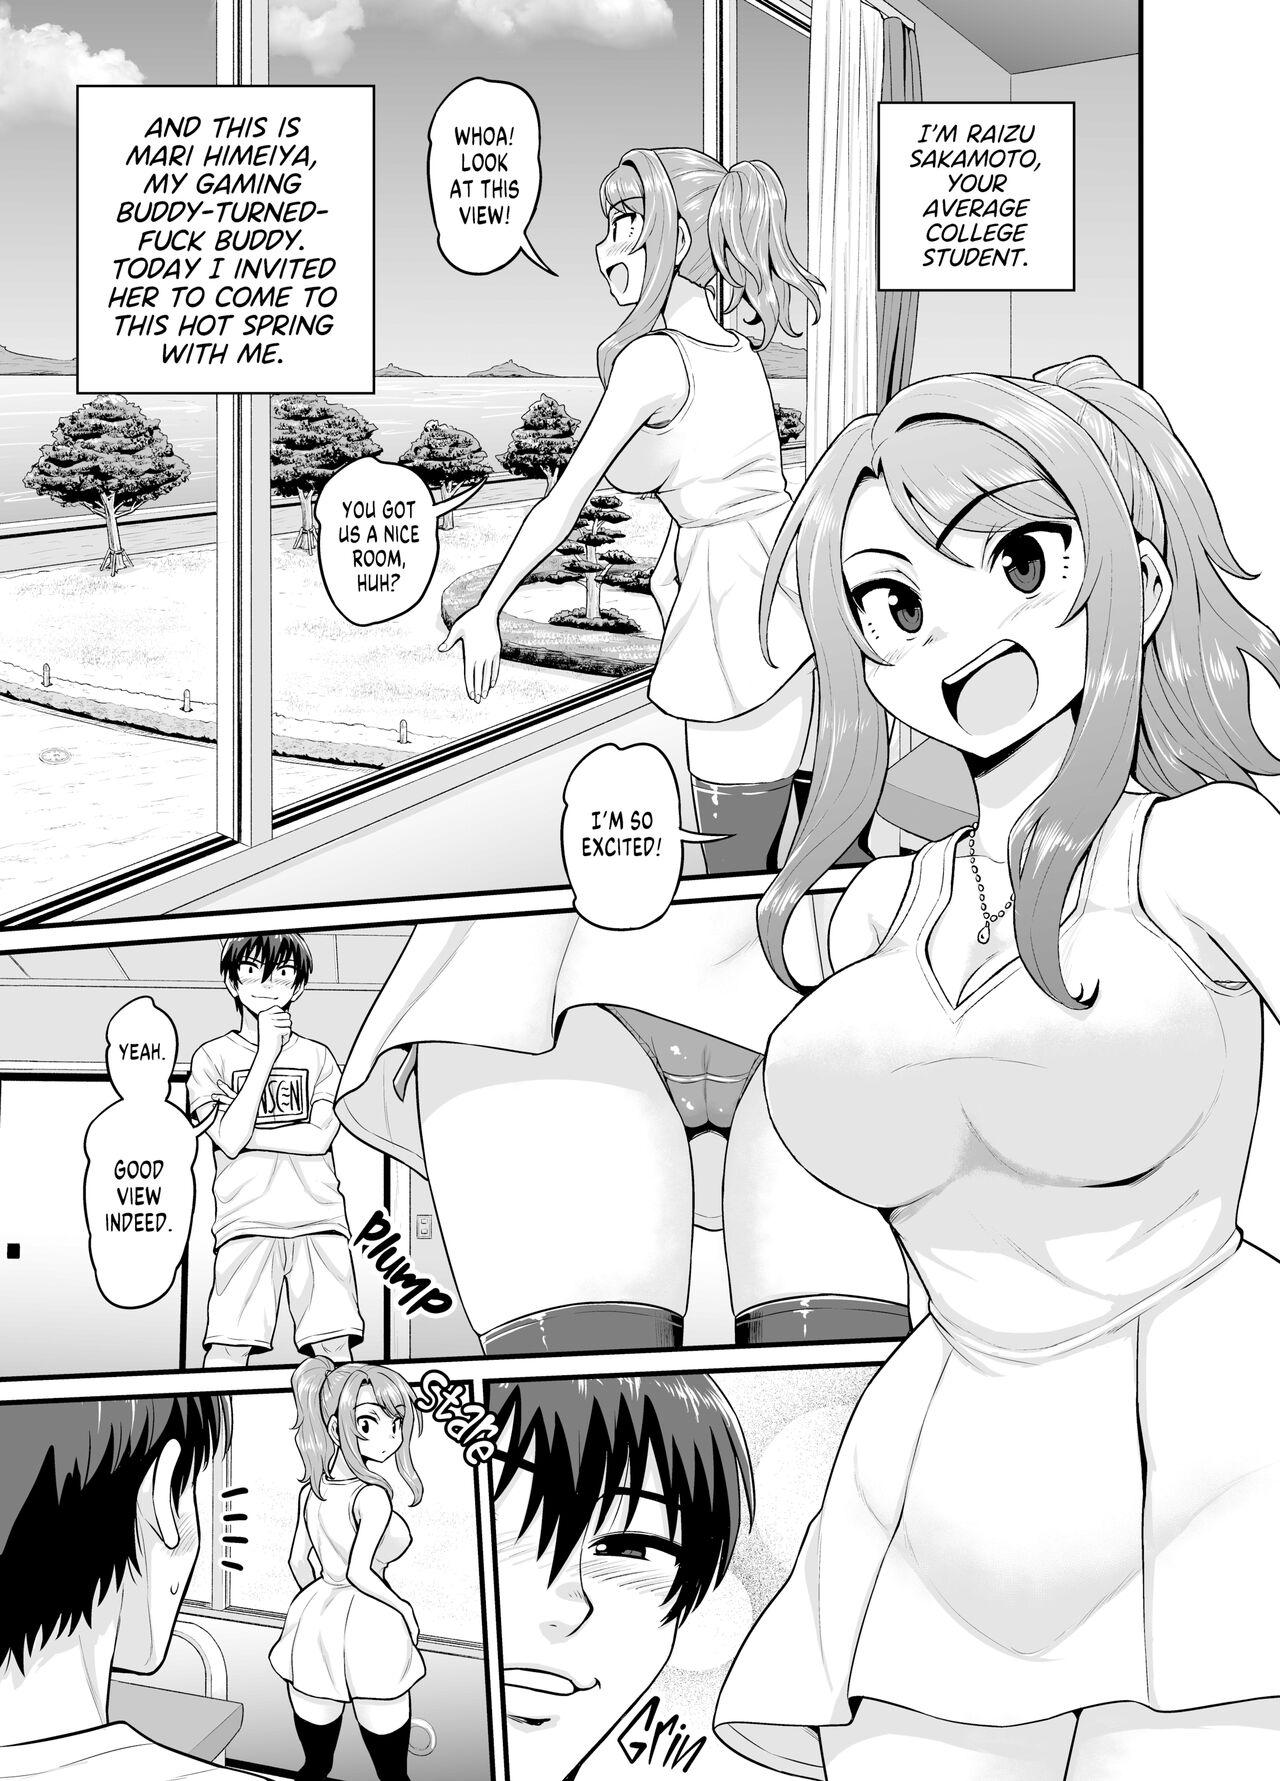 Chudai Getting it On With Your Gaming Buddy at the Hot Spring NTRVer. - Original Female Orgasm - Picture 2